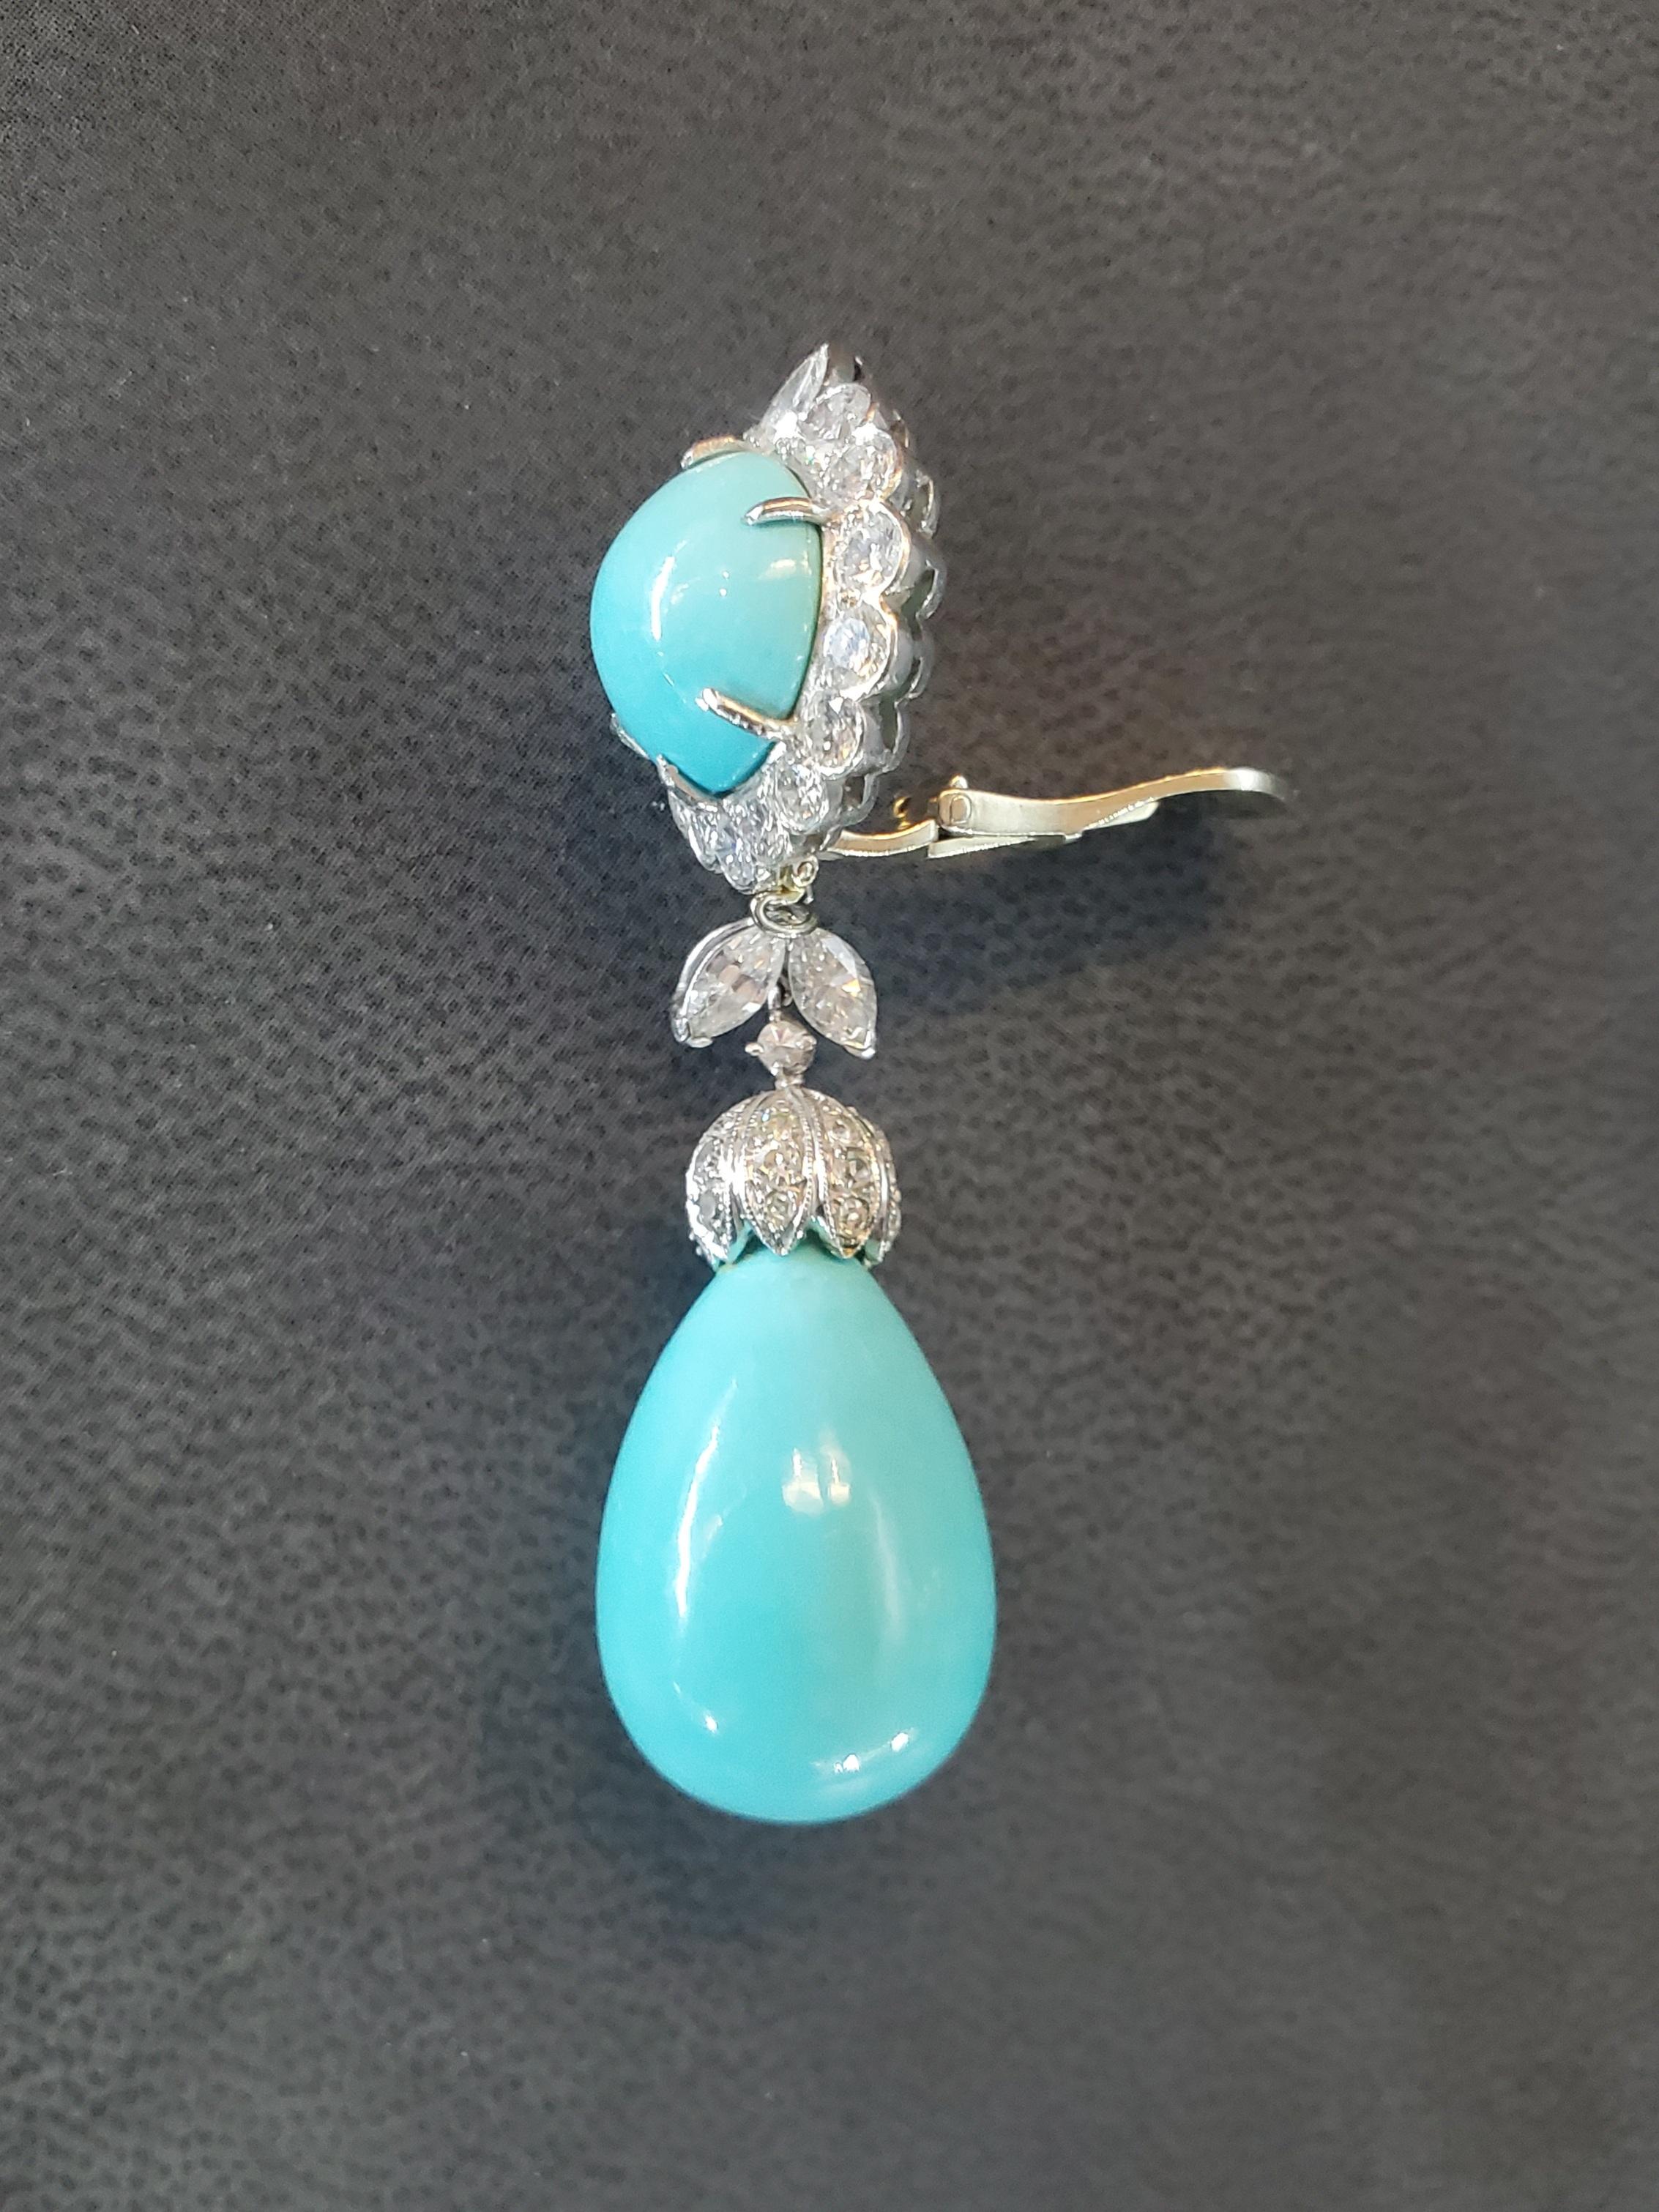 Iconic Van Cleef & Arpels Turquoise & Diamond 'Day and Night' Earrings 6